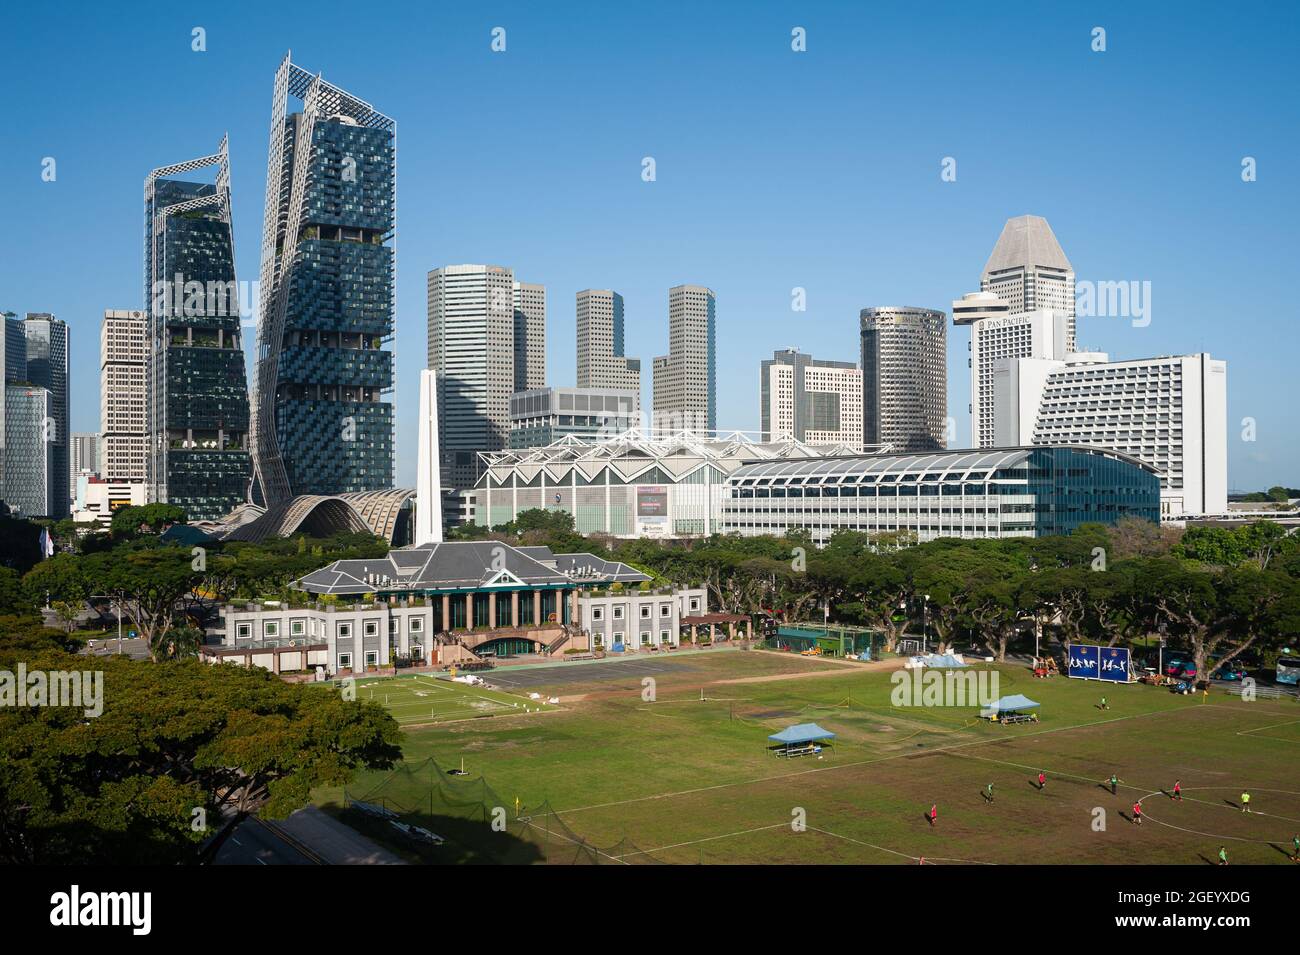 05.01.2020, Singapore, Republic of Singapore, Asia - View from the rooftop terrace at the National Gallery Singapore of the city skyline in downtown. Stock Photo